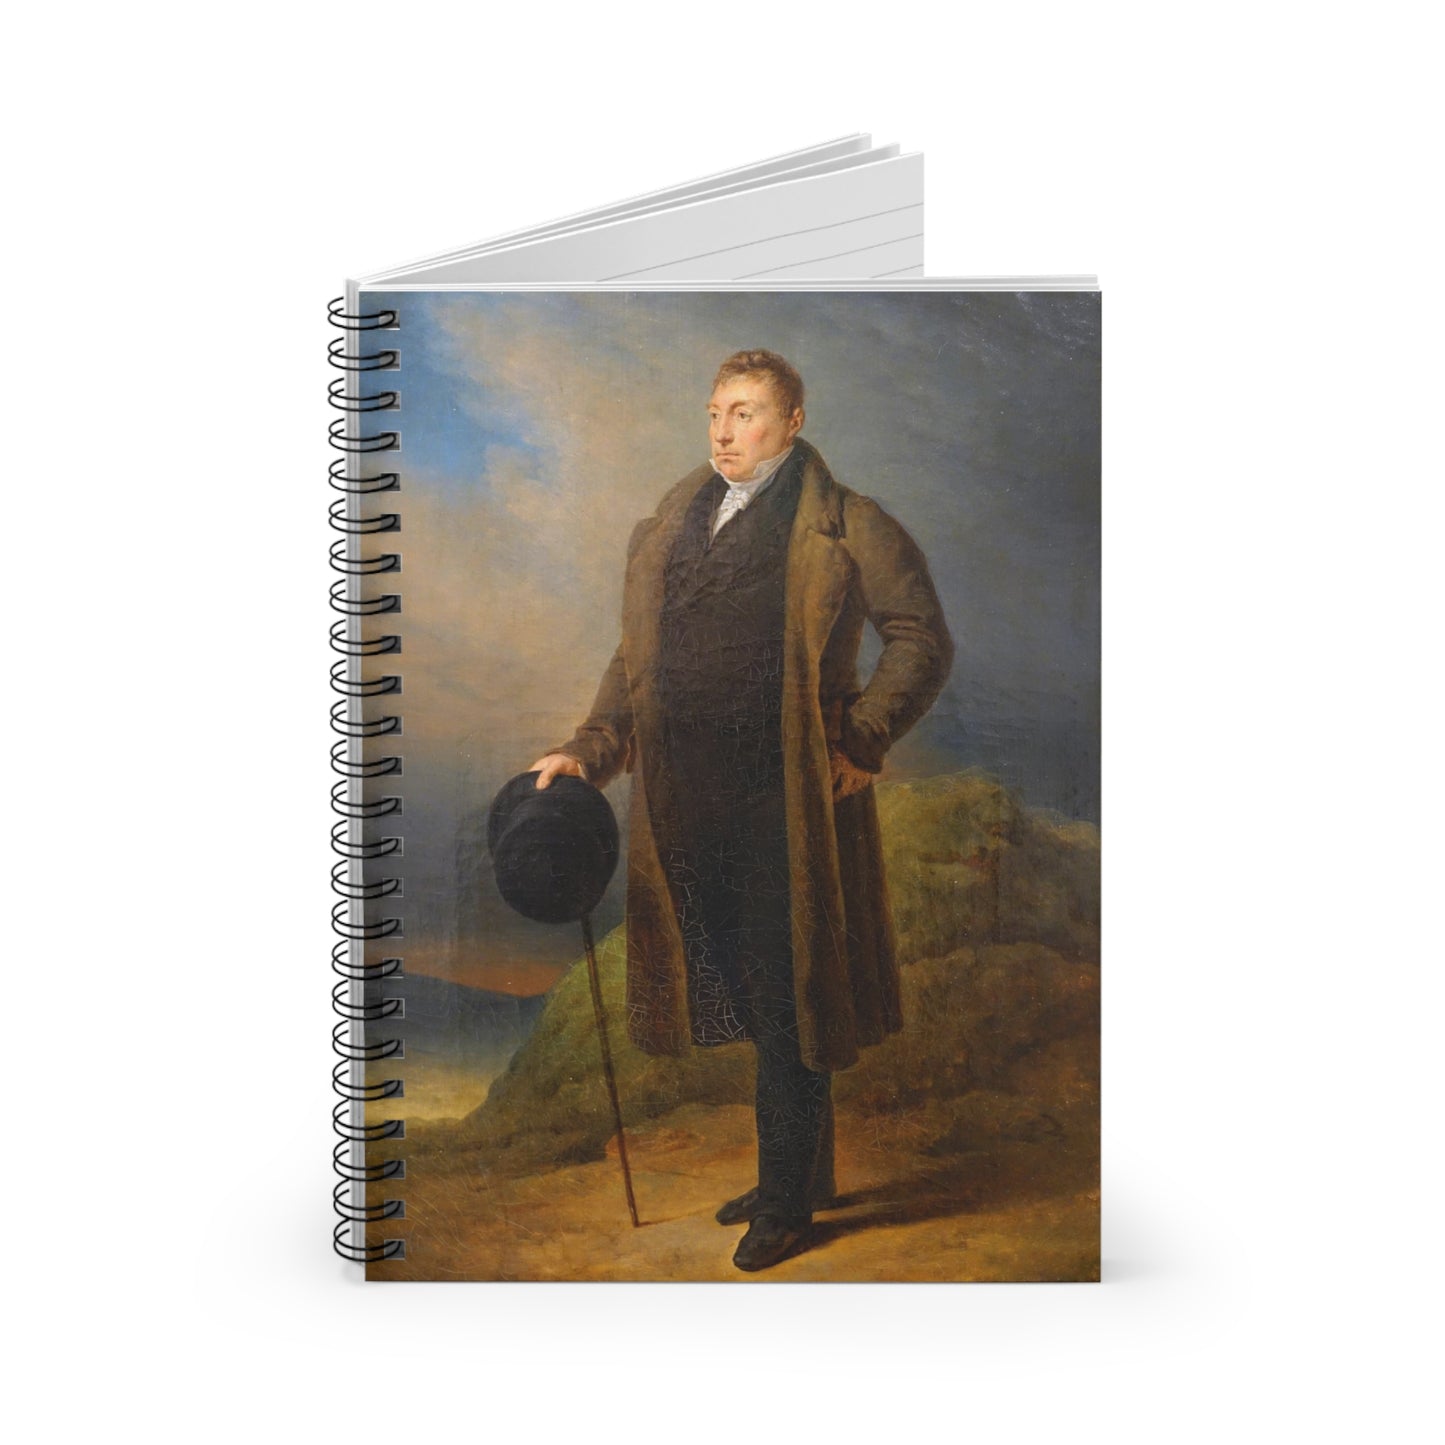 Lafayette1820's full-length Portrait Spiral Notebook - 6"x 8" lined-page notebook